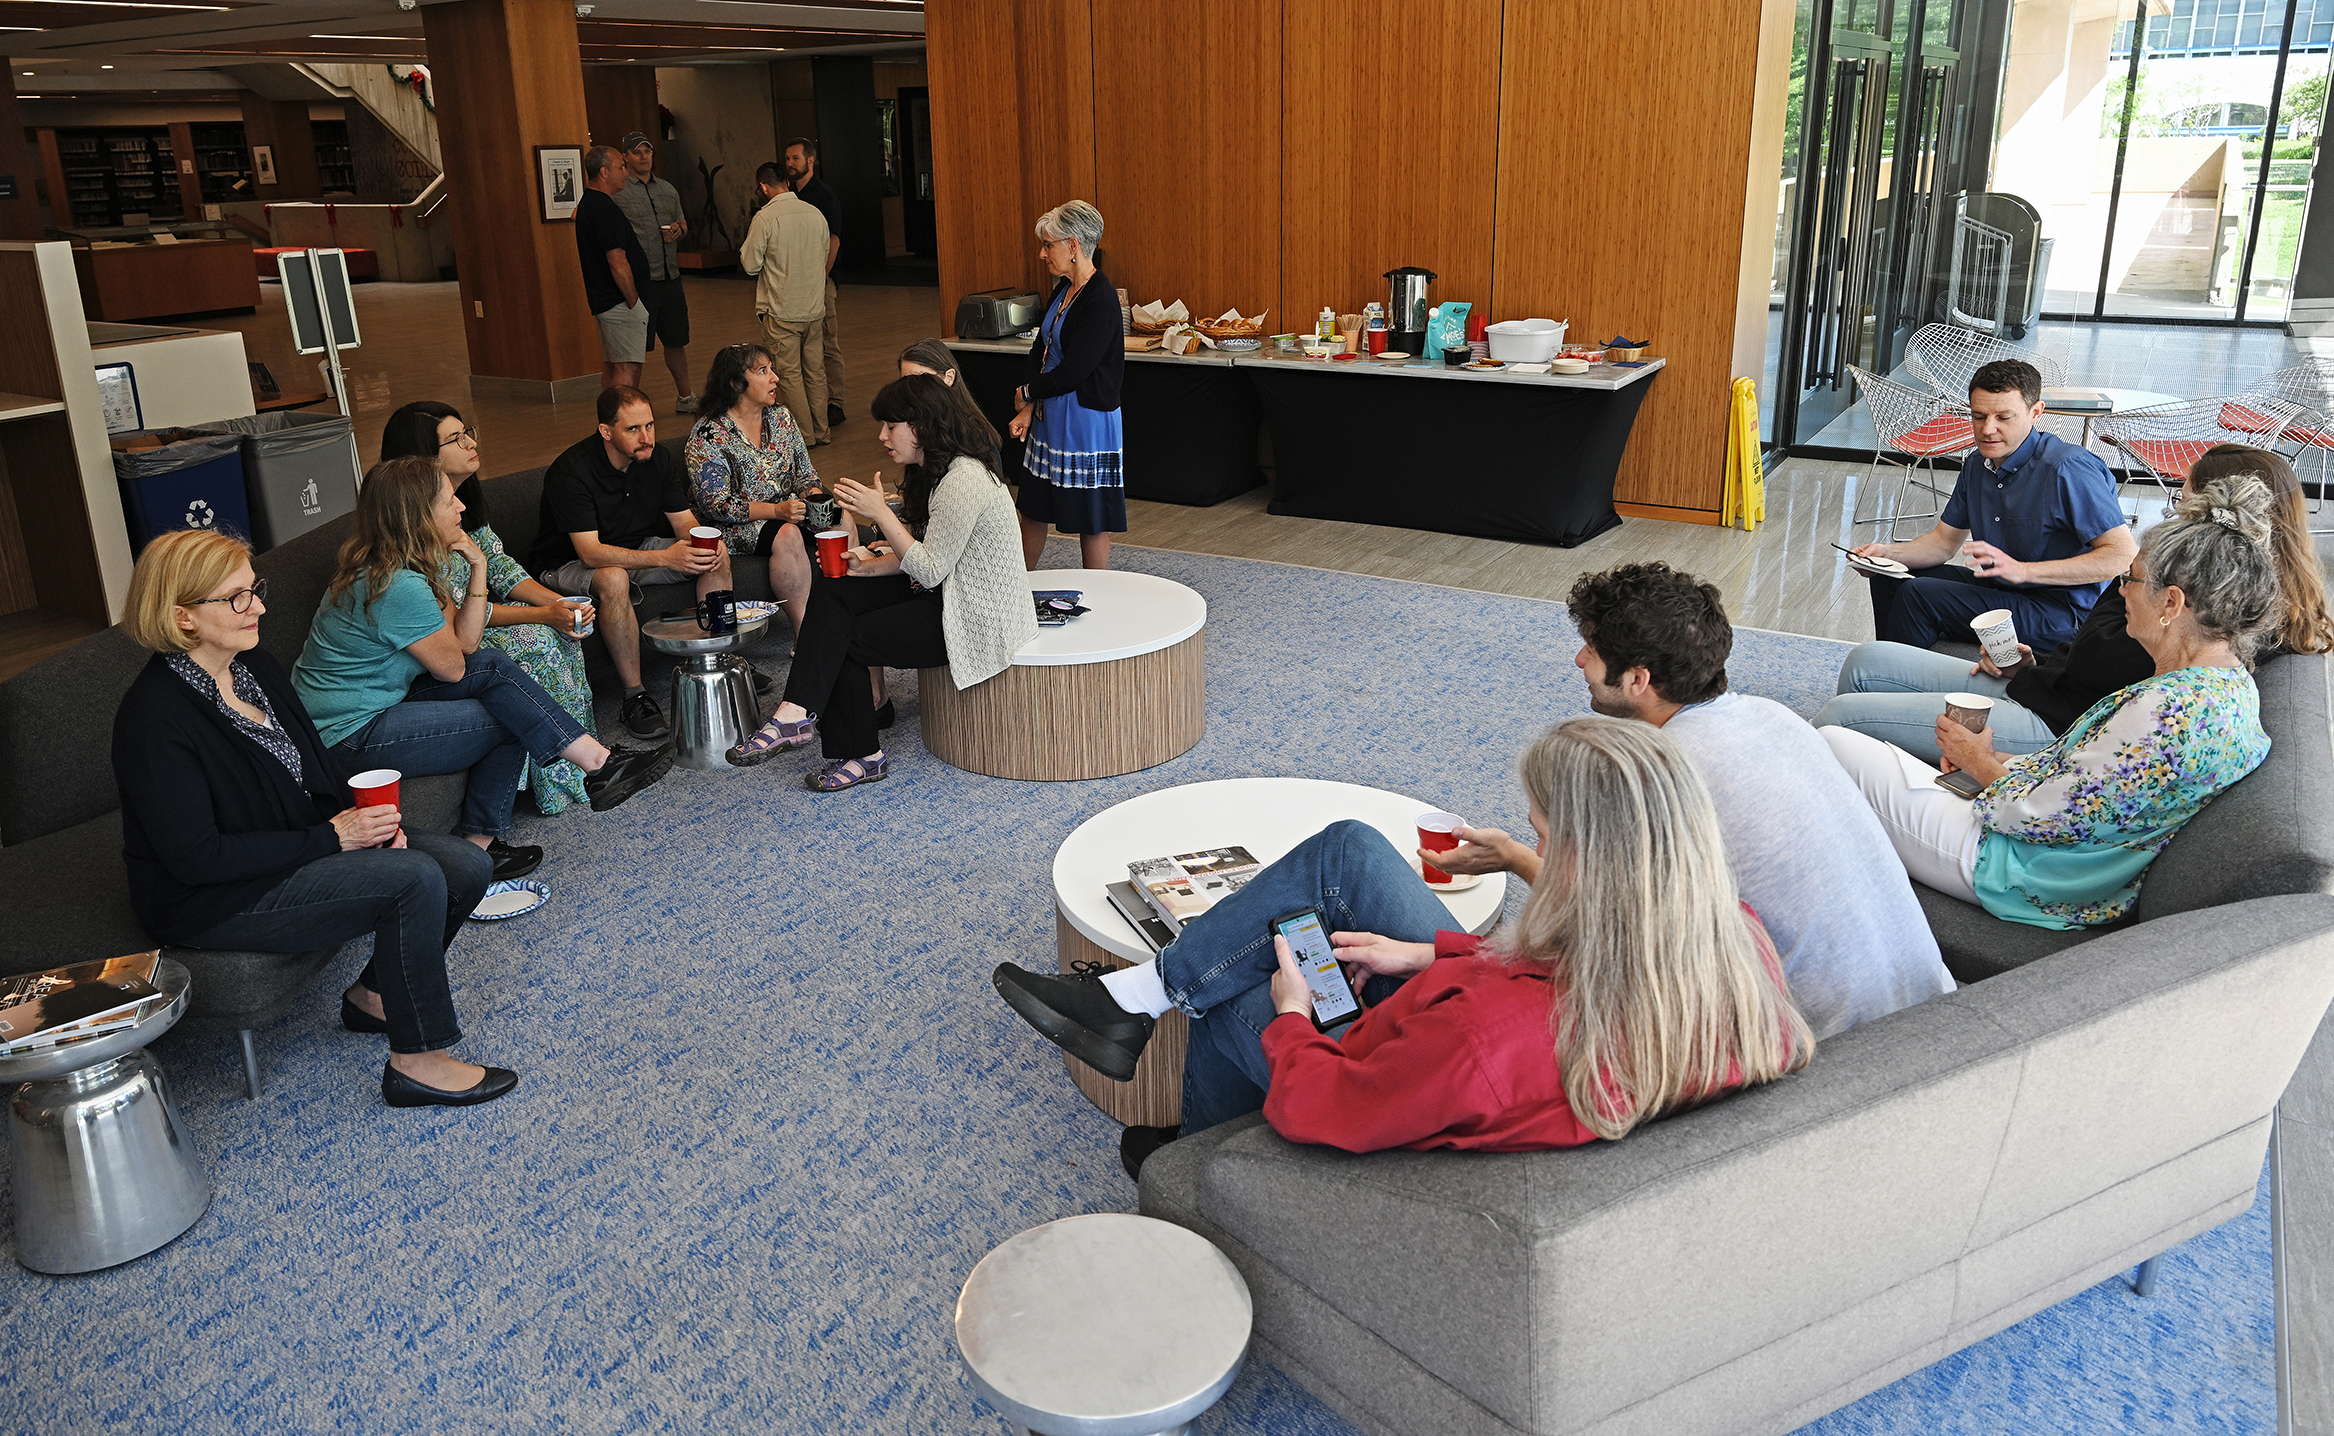 A group of people sit around and socialize in a library common room